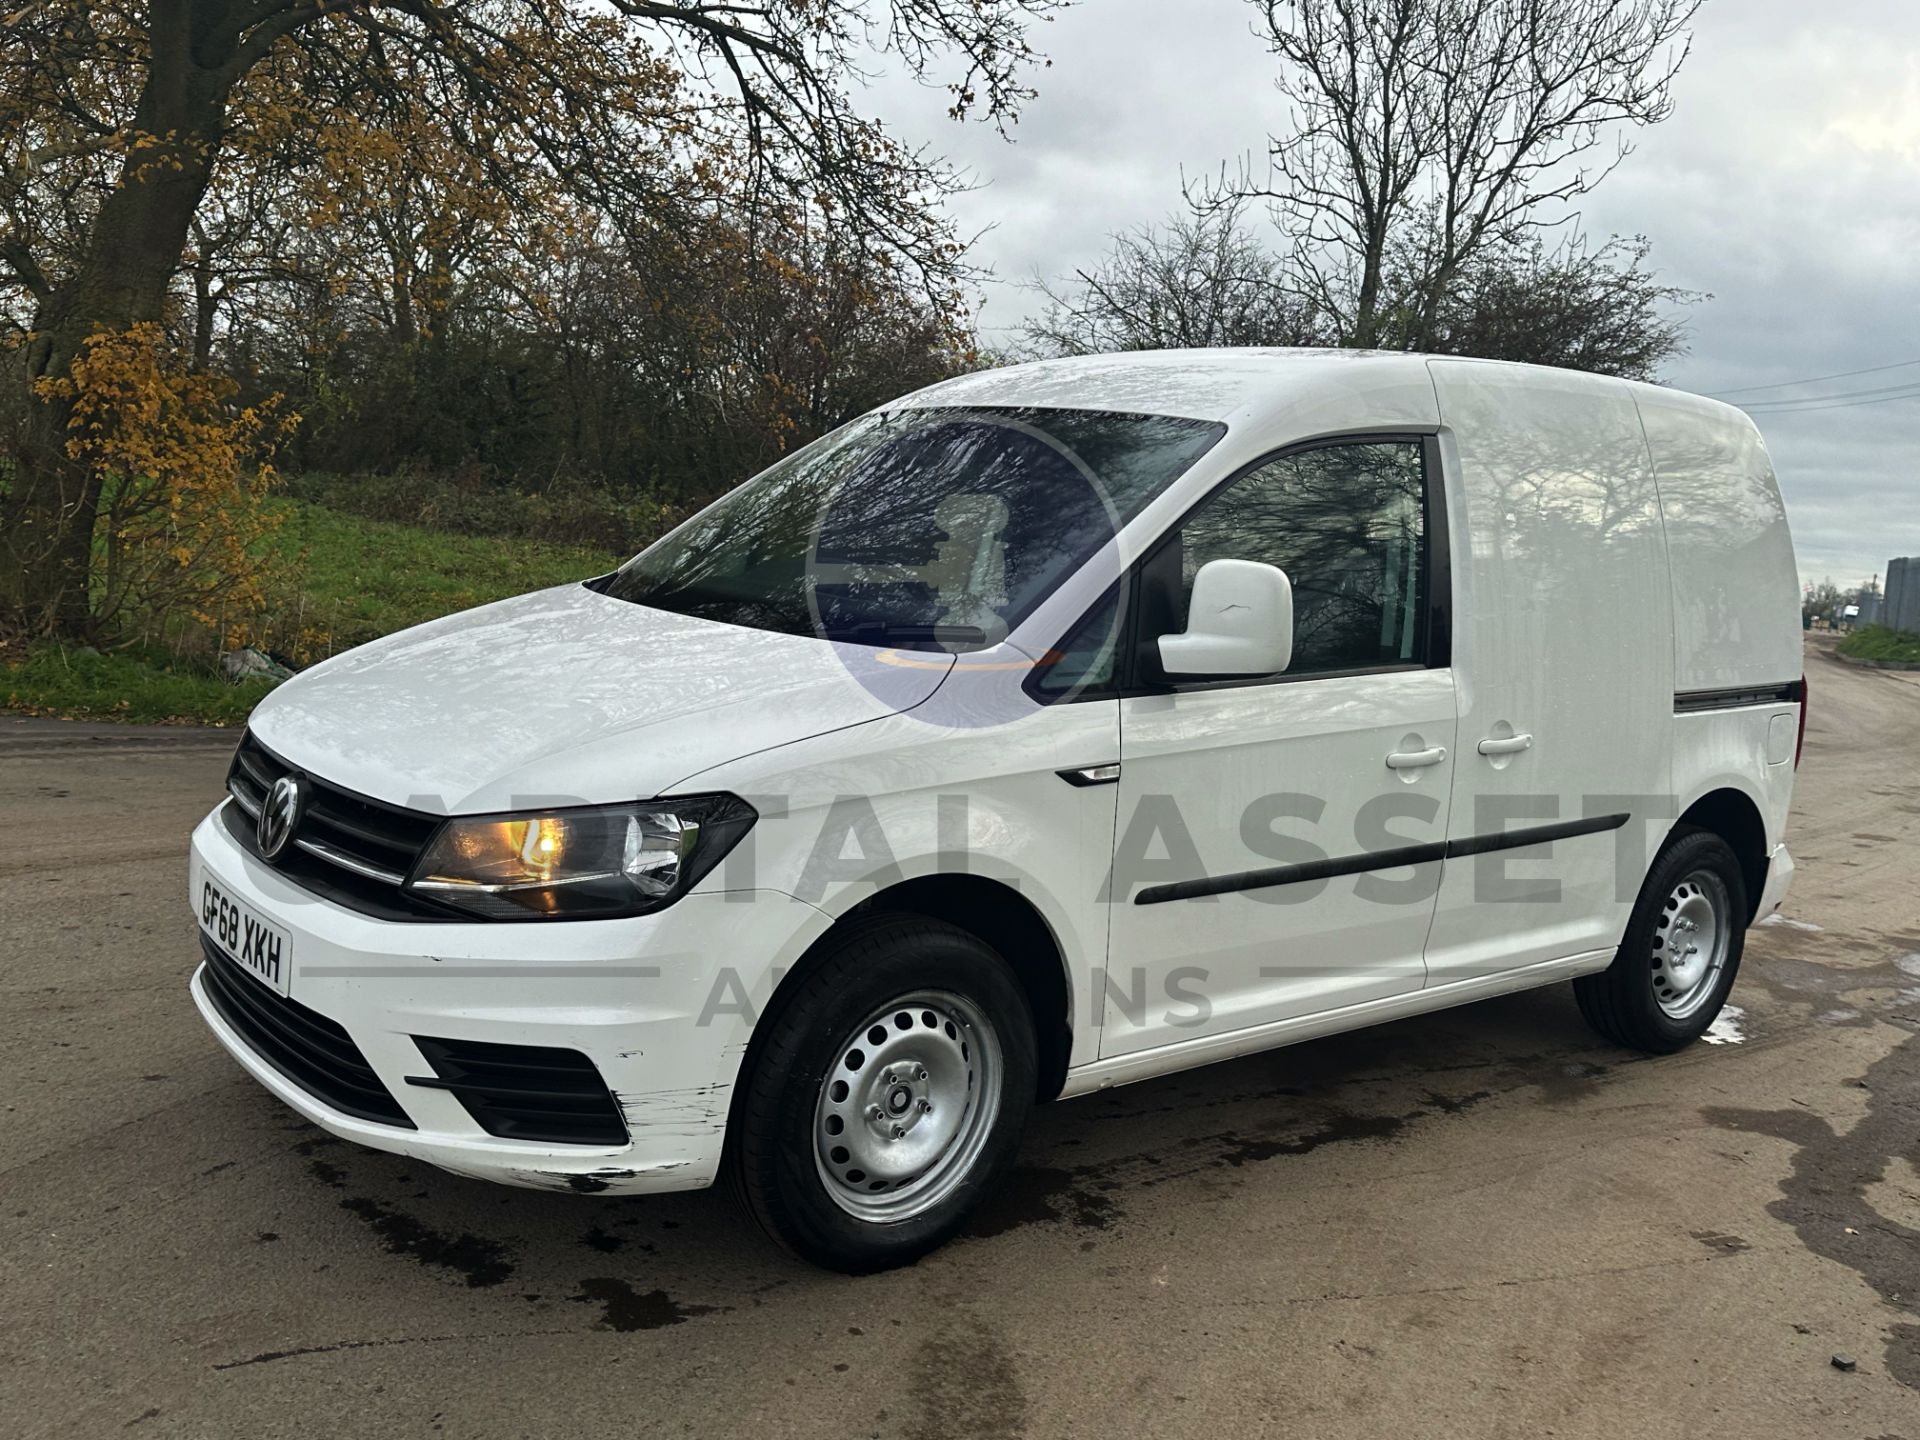 (On Sale) VOLKSWAGEN CADDY 2.0TDI BMT *TRENDLINE EDITION* 1 OWNER FSH (2019 MODEL) AIR CON - EURO 6 - Image 6 of 38